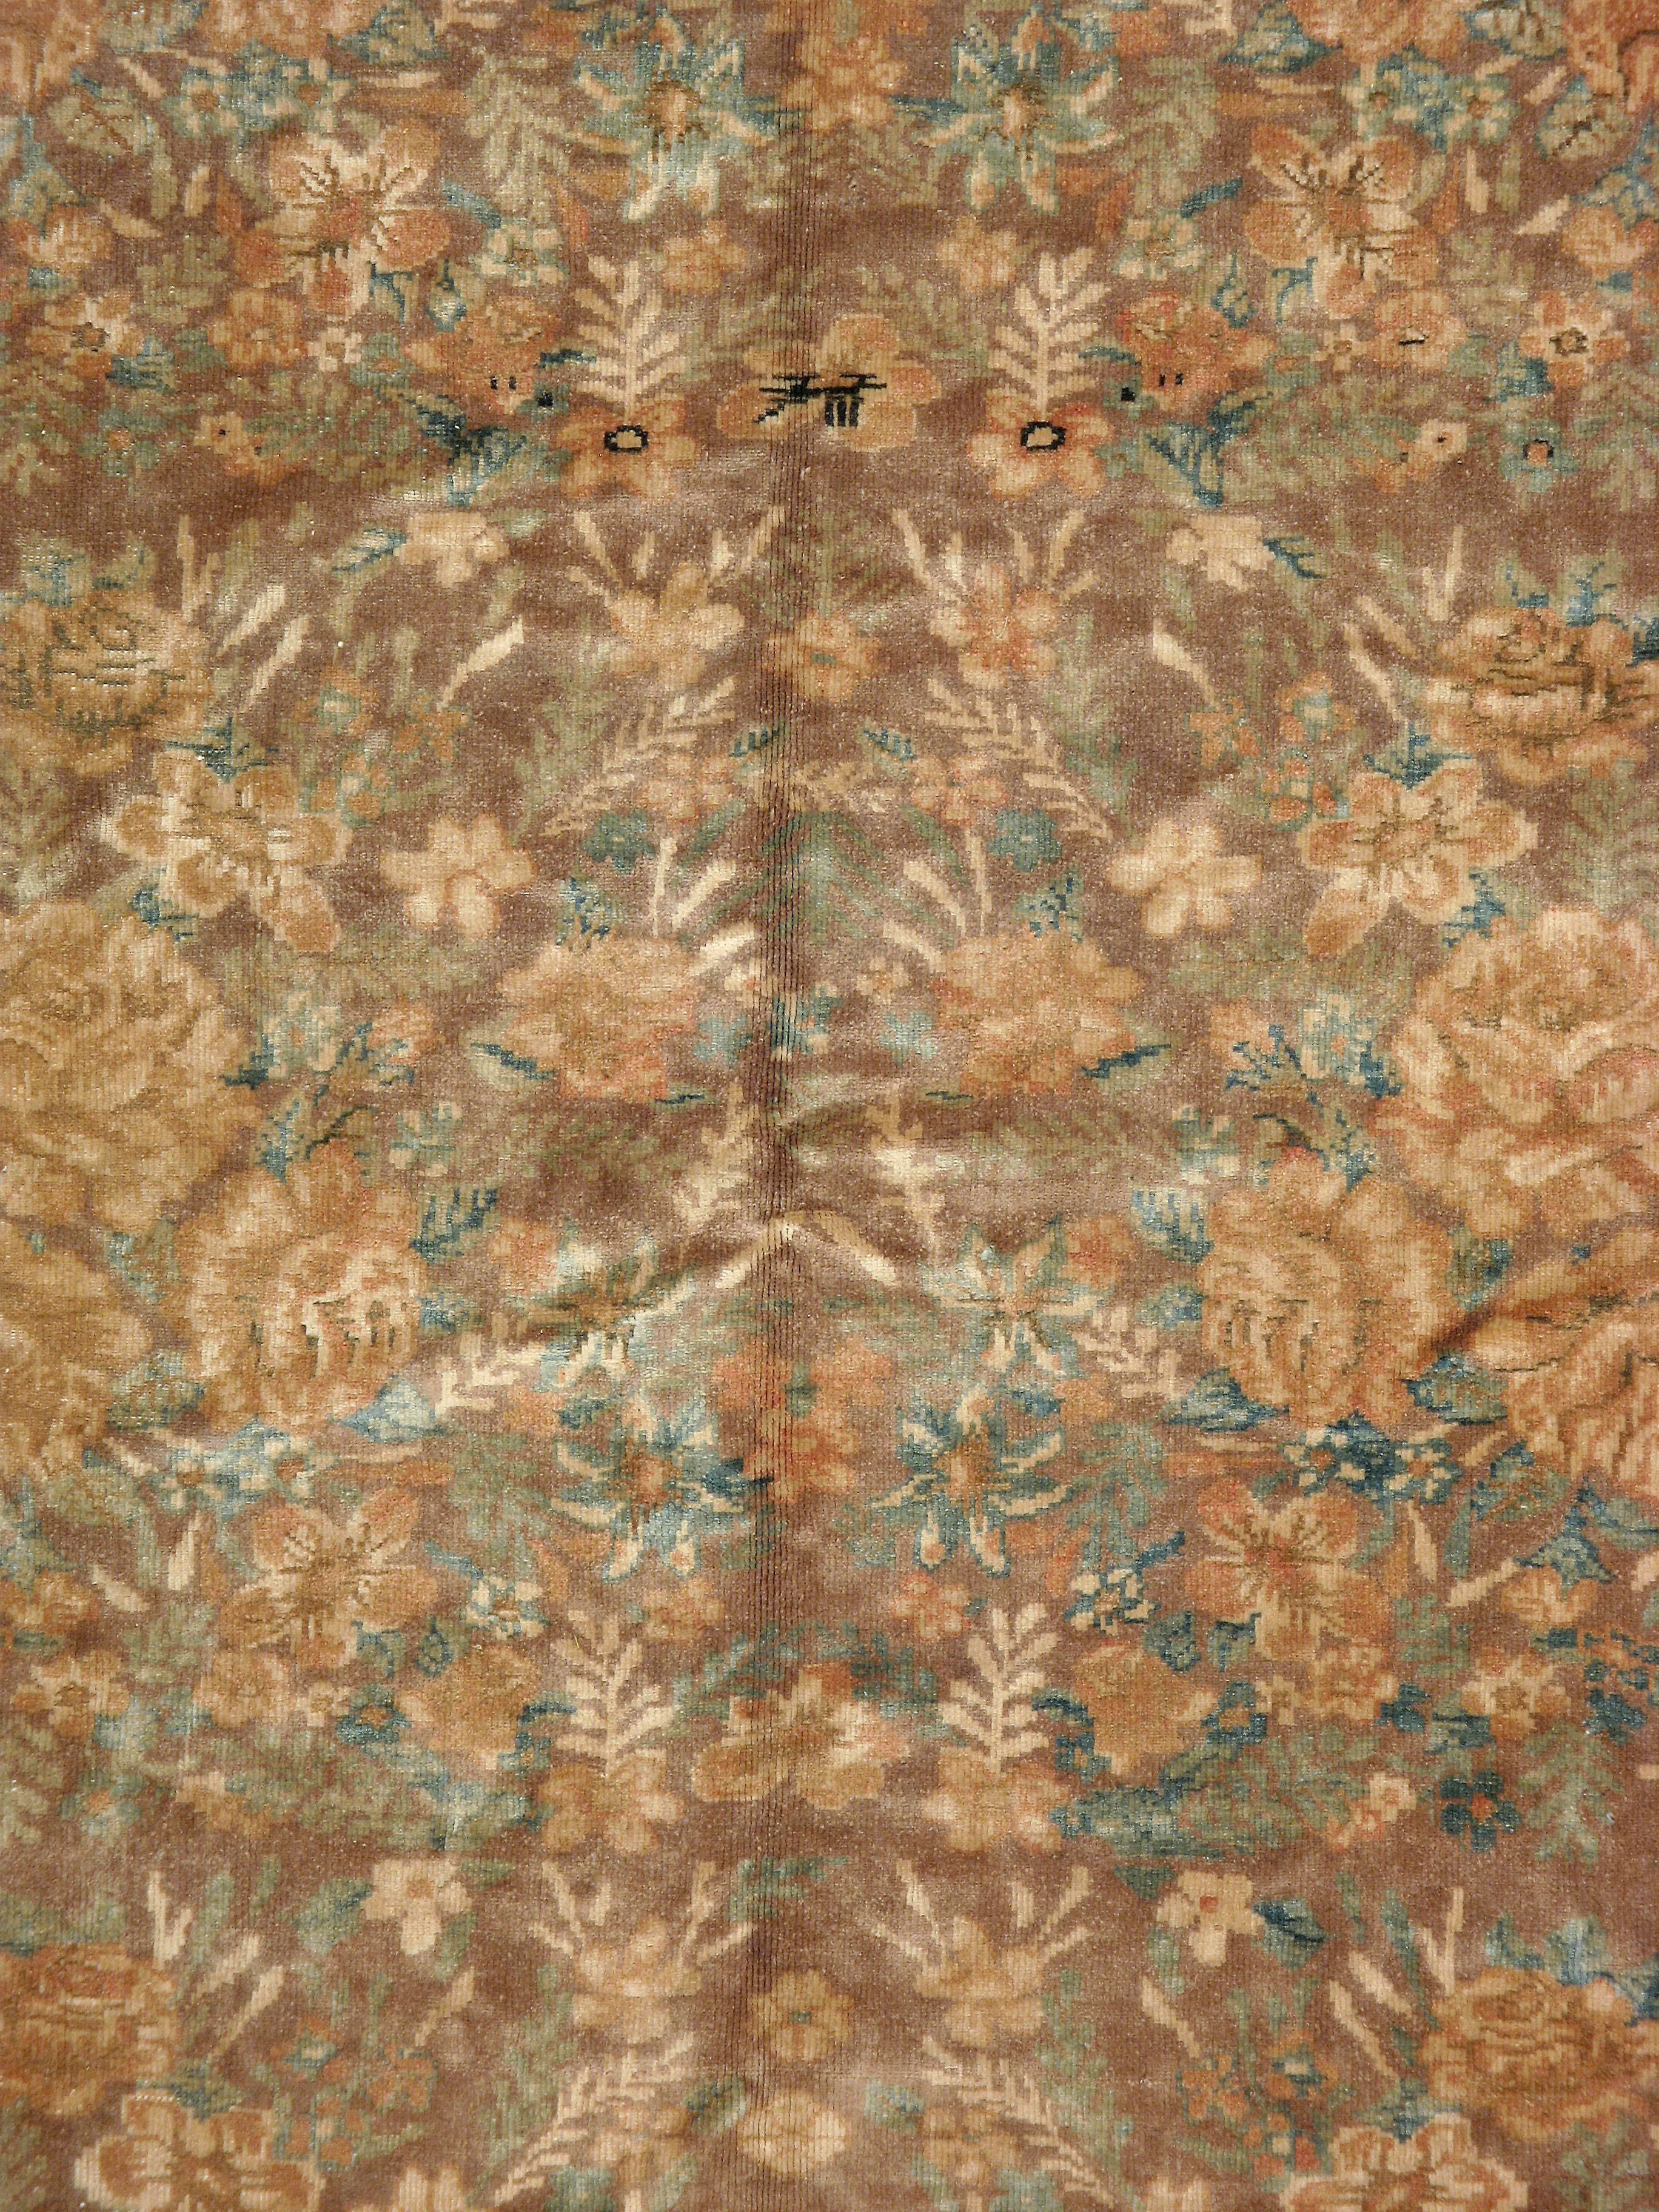 A vintage Russian Karabagh carpet from the second quarter of the 20th century with an elegant horror vacui floral pattern.